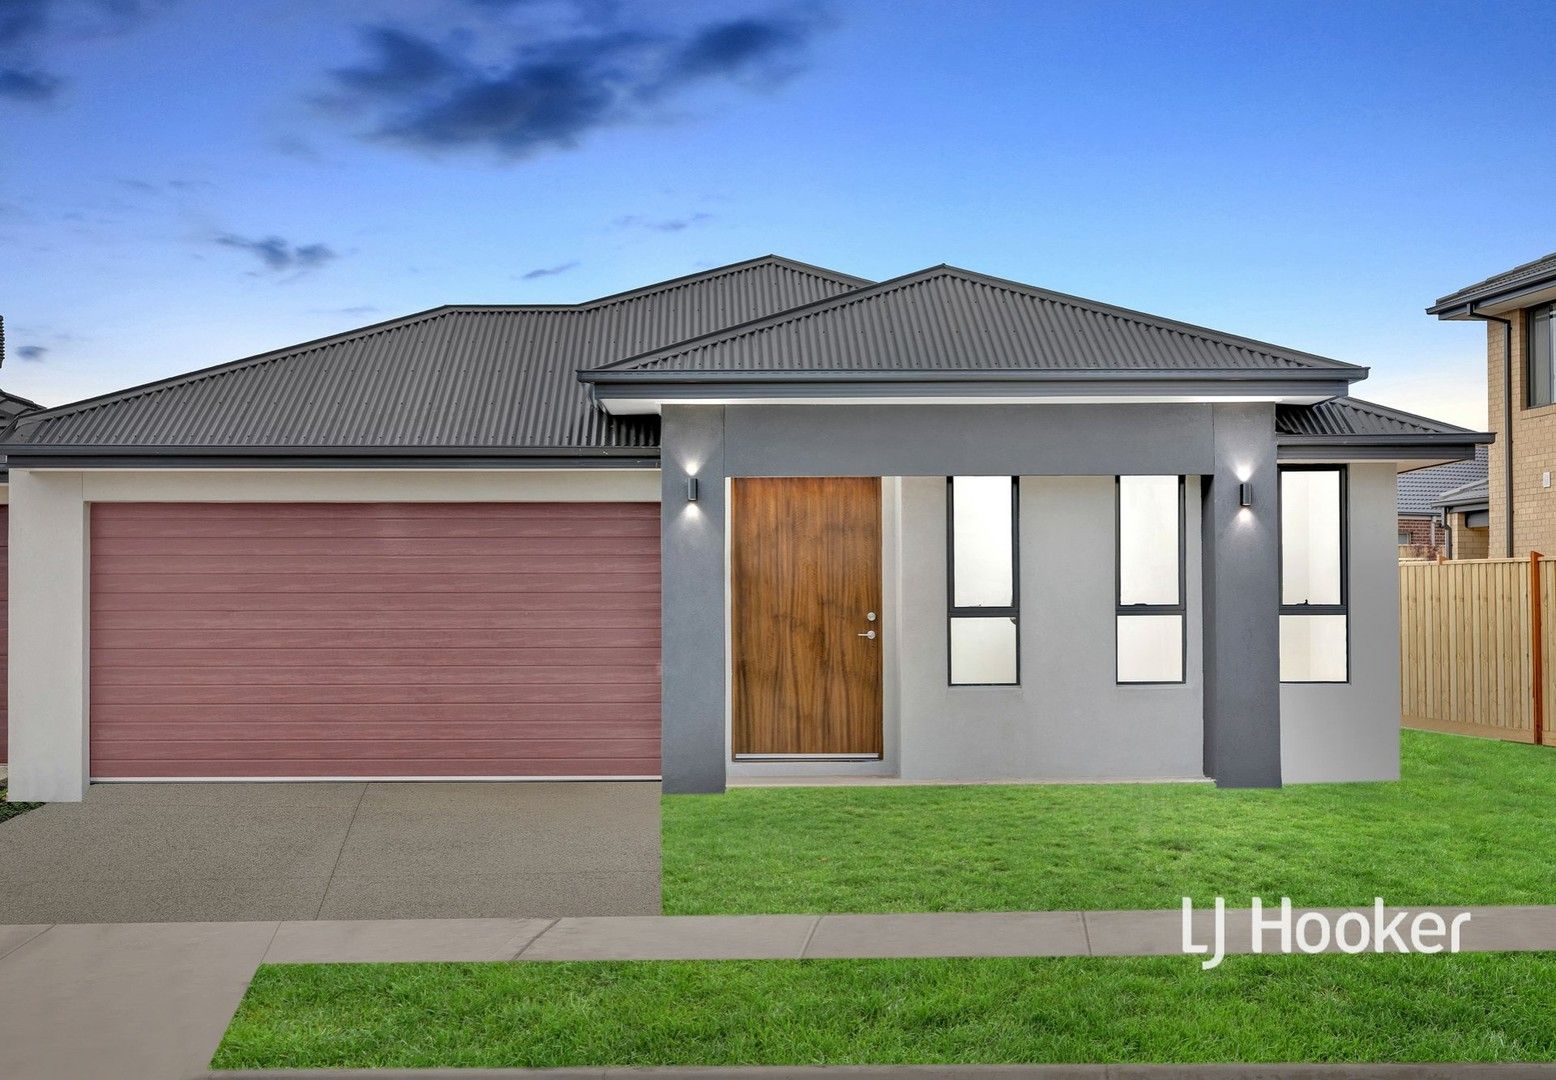 4 bedrooms House in 49 Vignette Road DIGGERS REST VIC, 3427